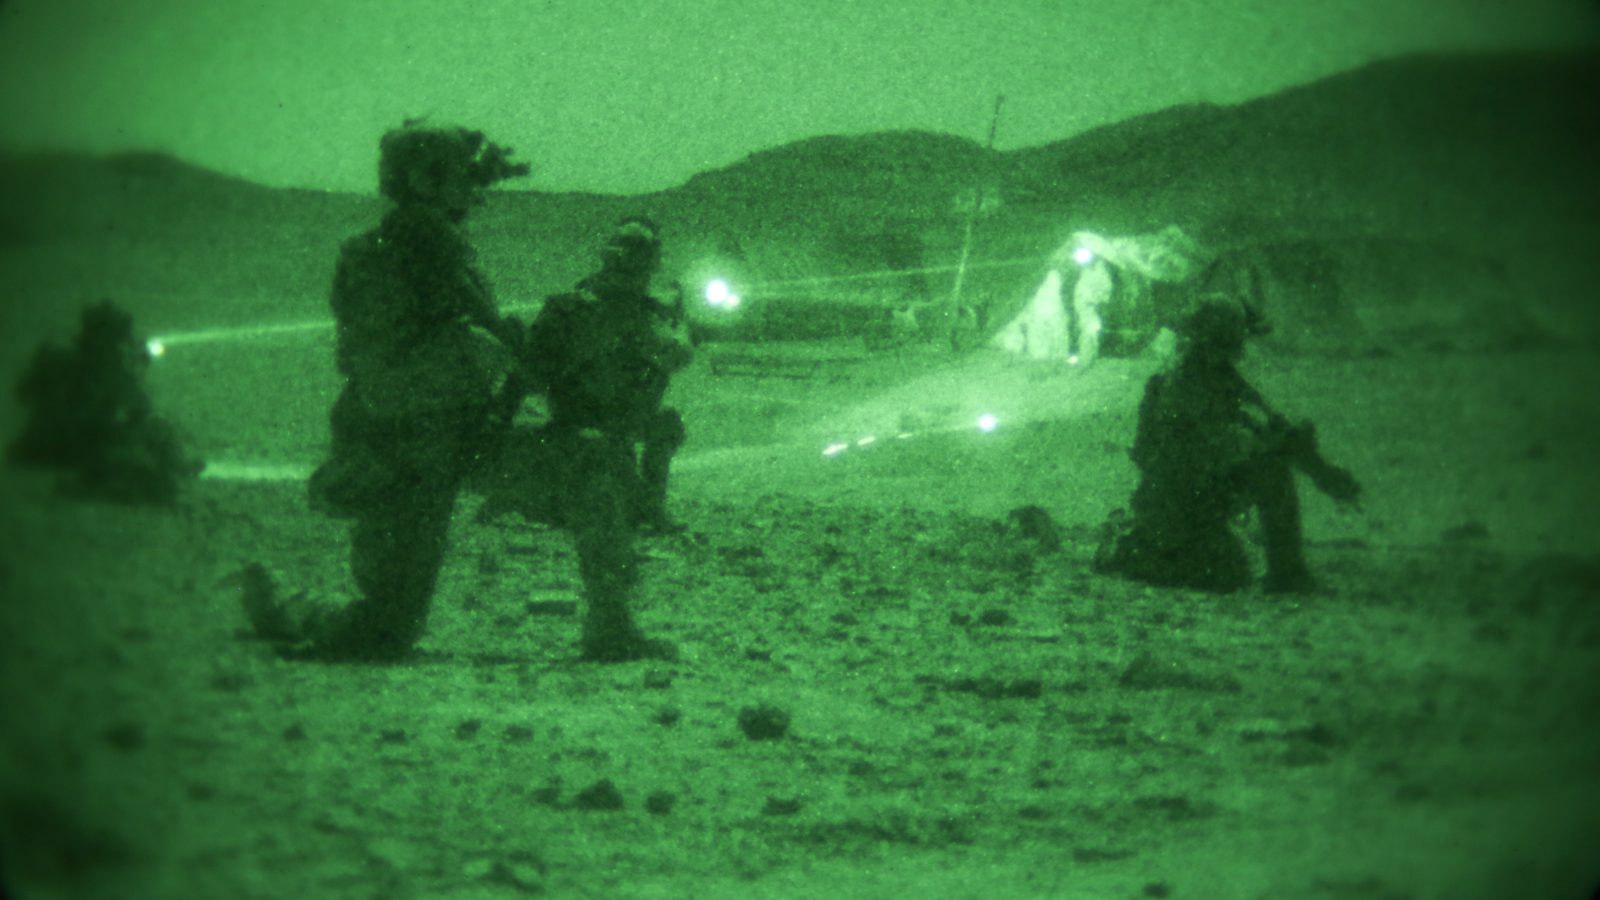 military operation at night